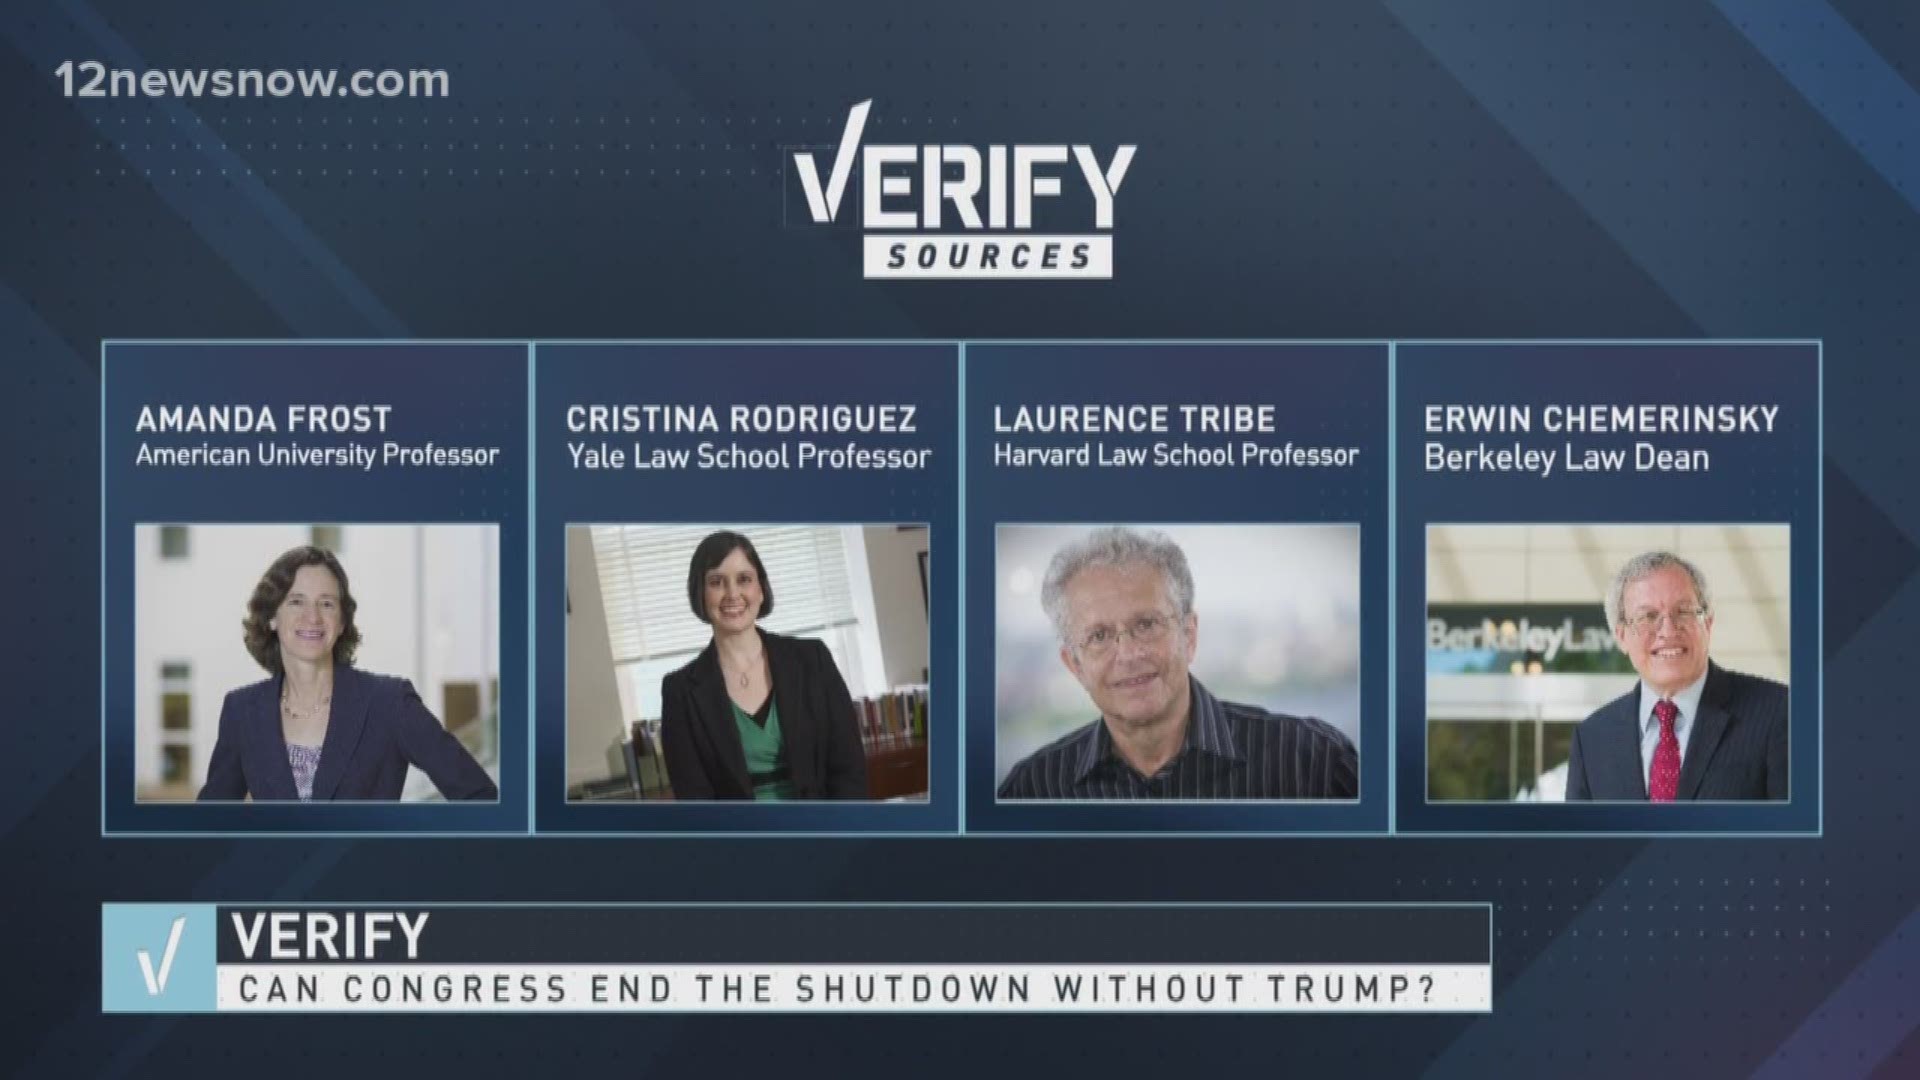 Four experts weigh in on whether Congress can constitutionally end the shutdown without Trump.